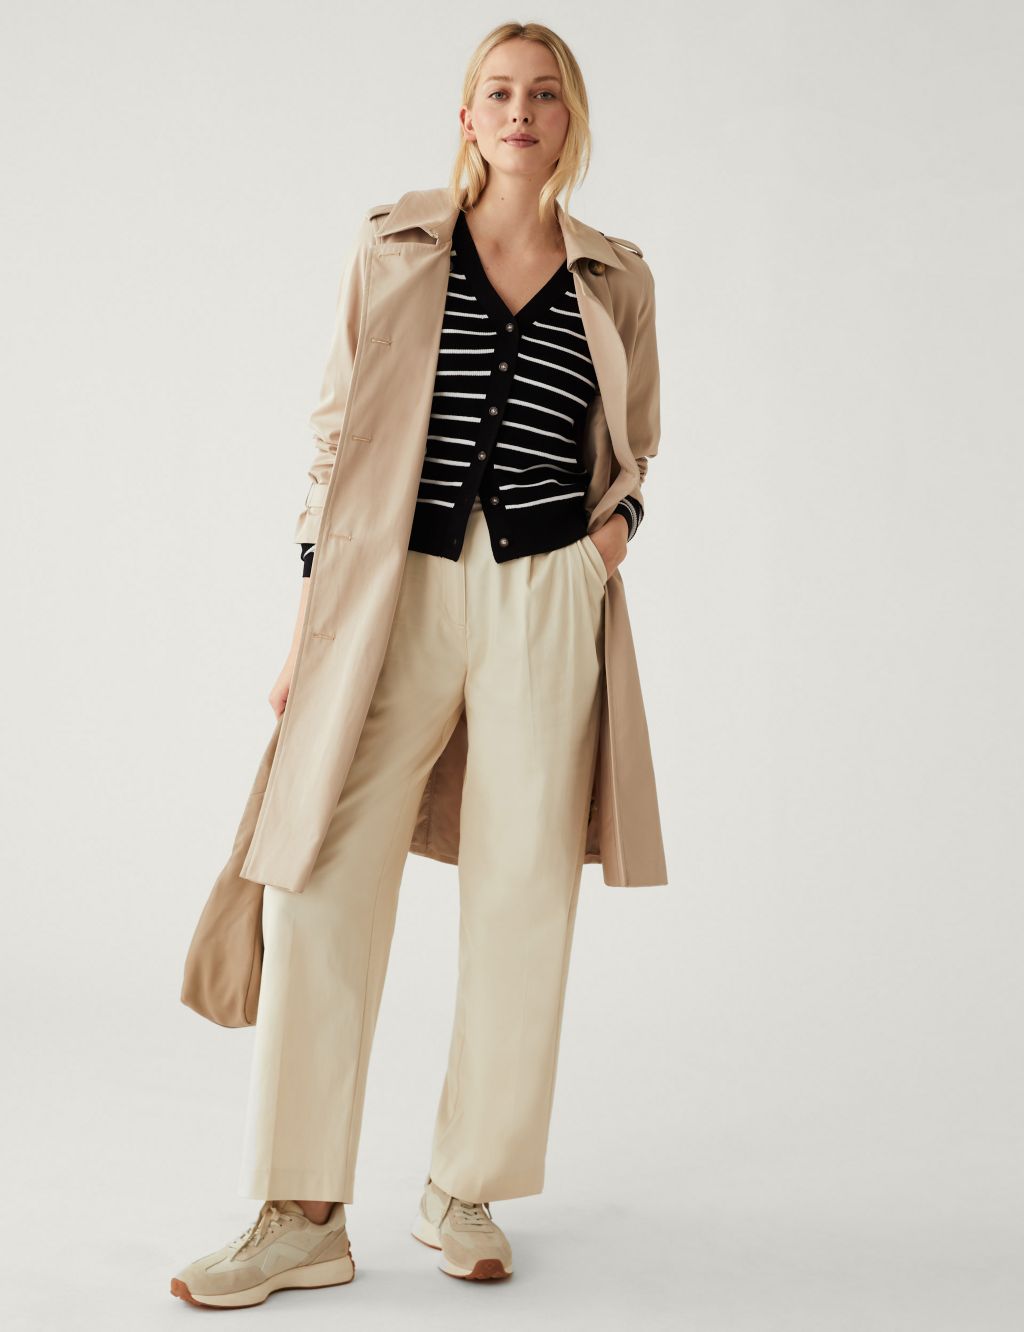 Striped V-Neck Button Front Cardigan image 1